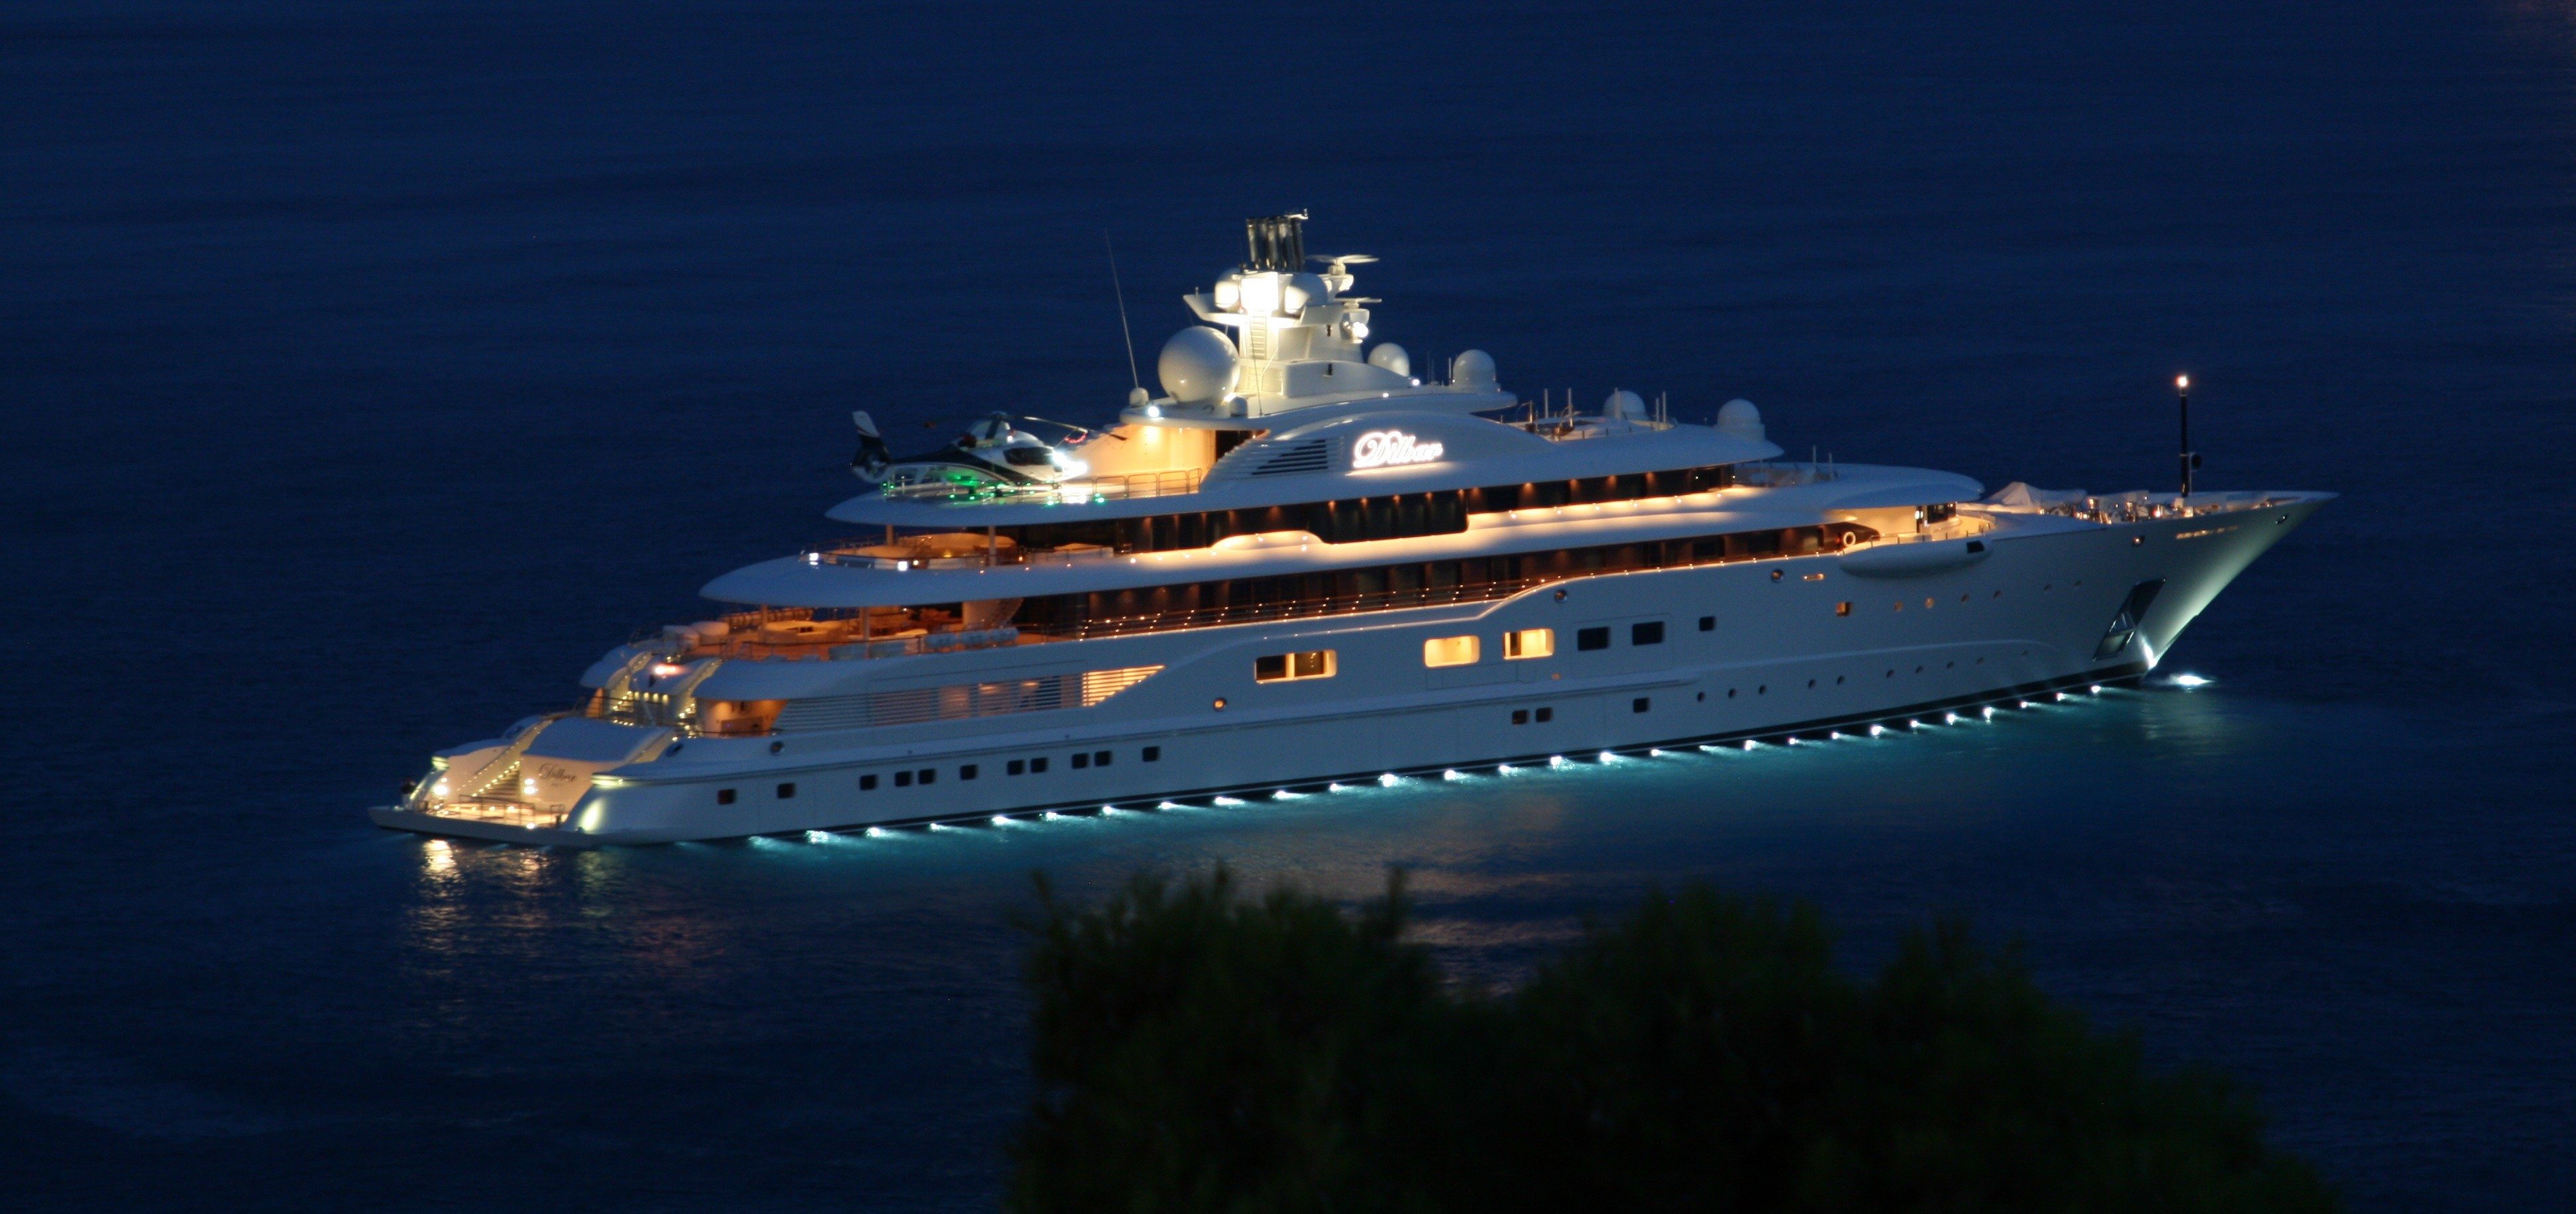 15 Most Expensive Yachts In The World And Their Owners3888 x 1832